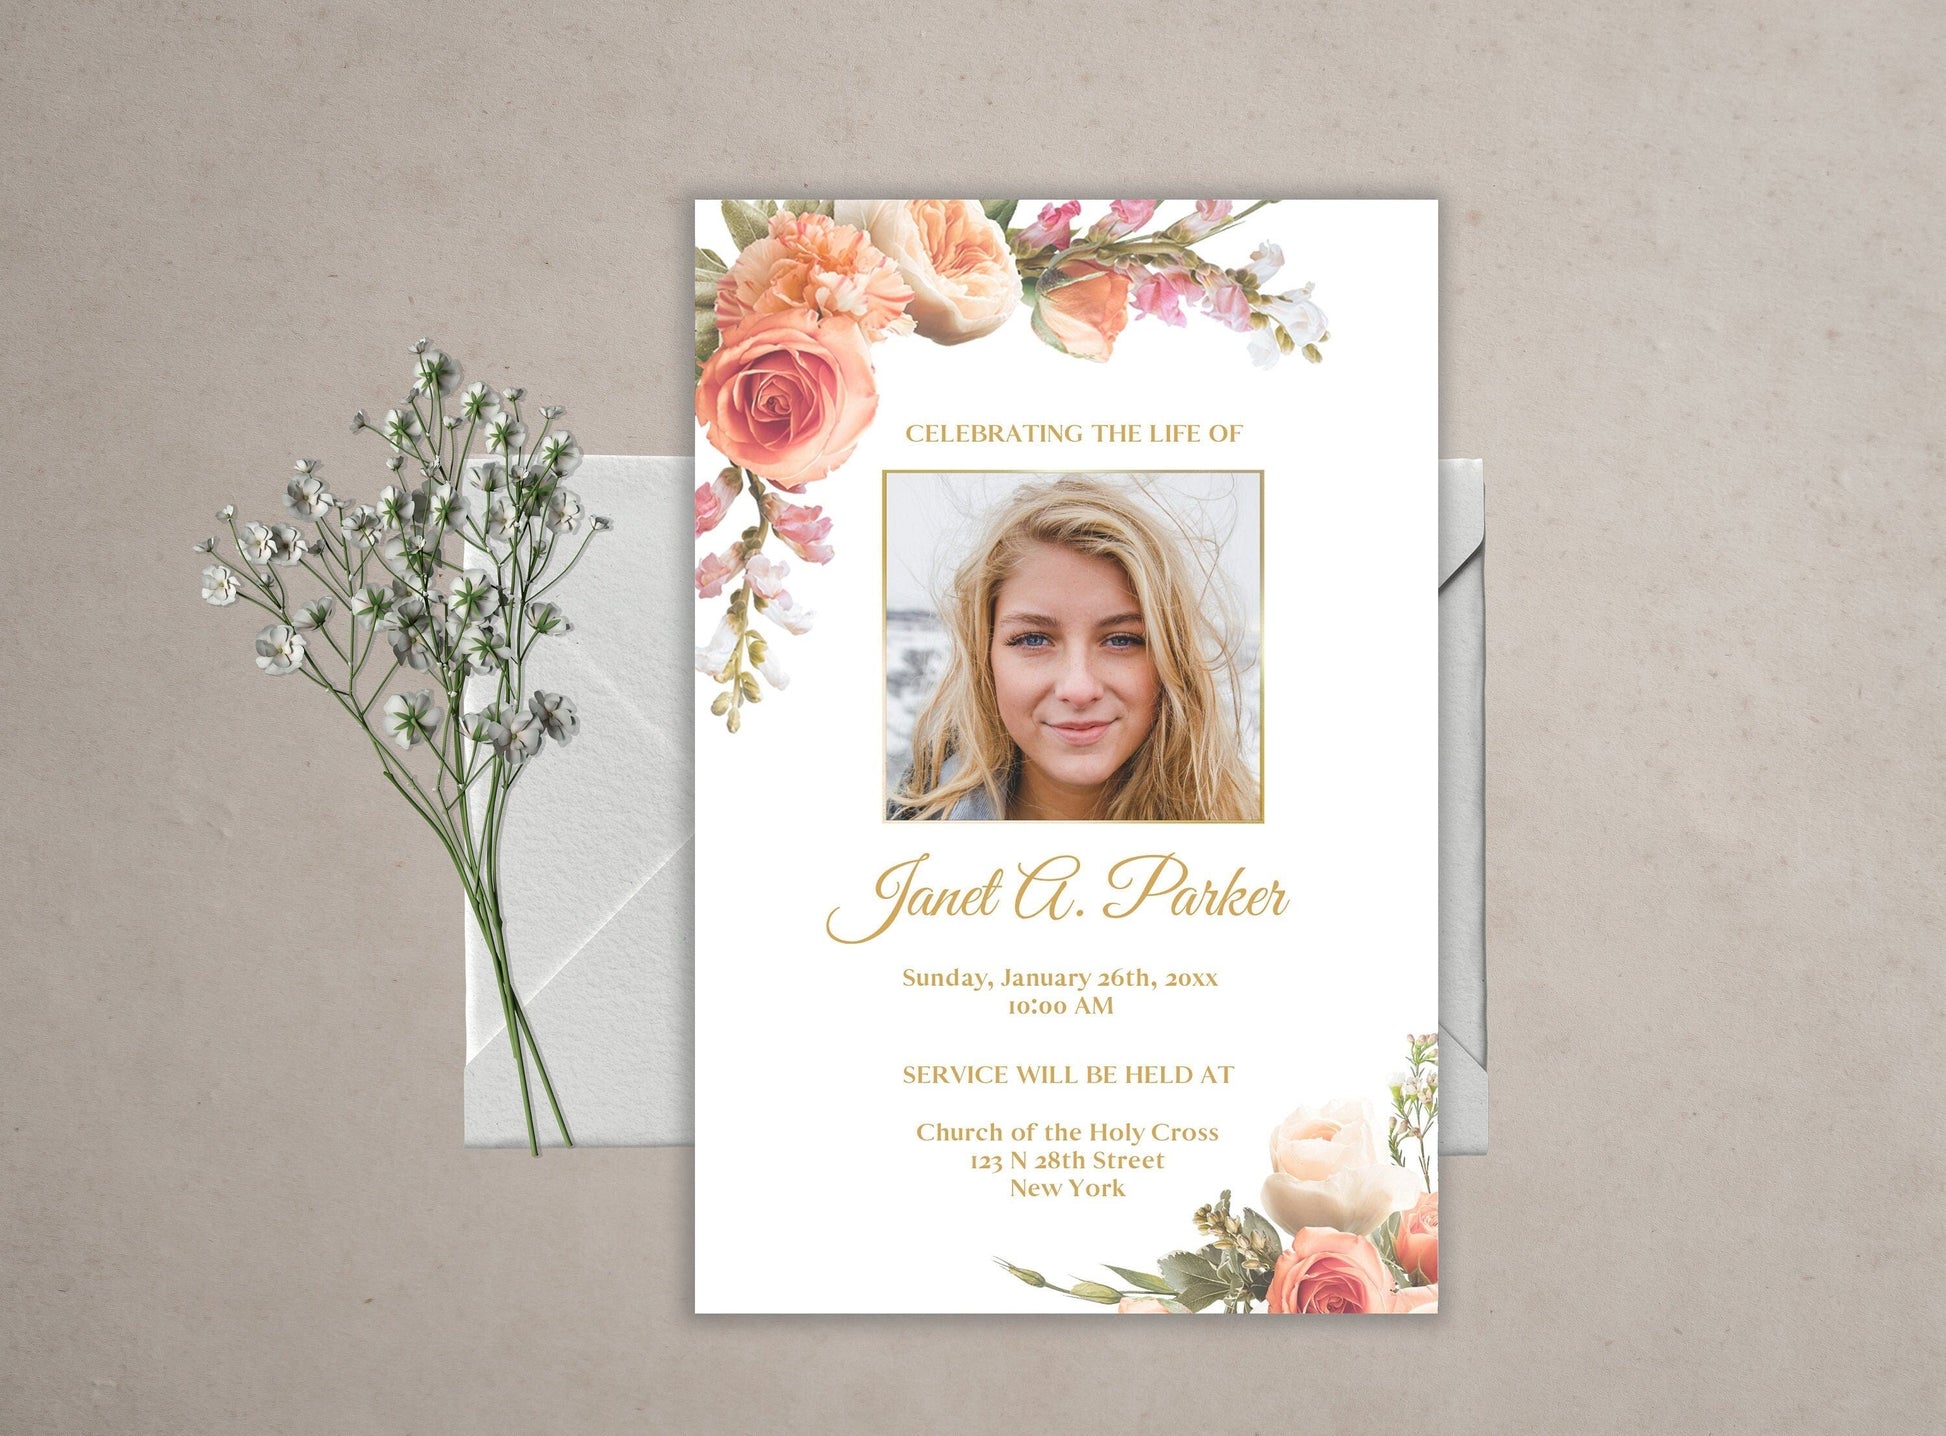 Beatiful peach roses in the corners of this funeral invitation, with gold border center photo